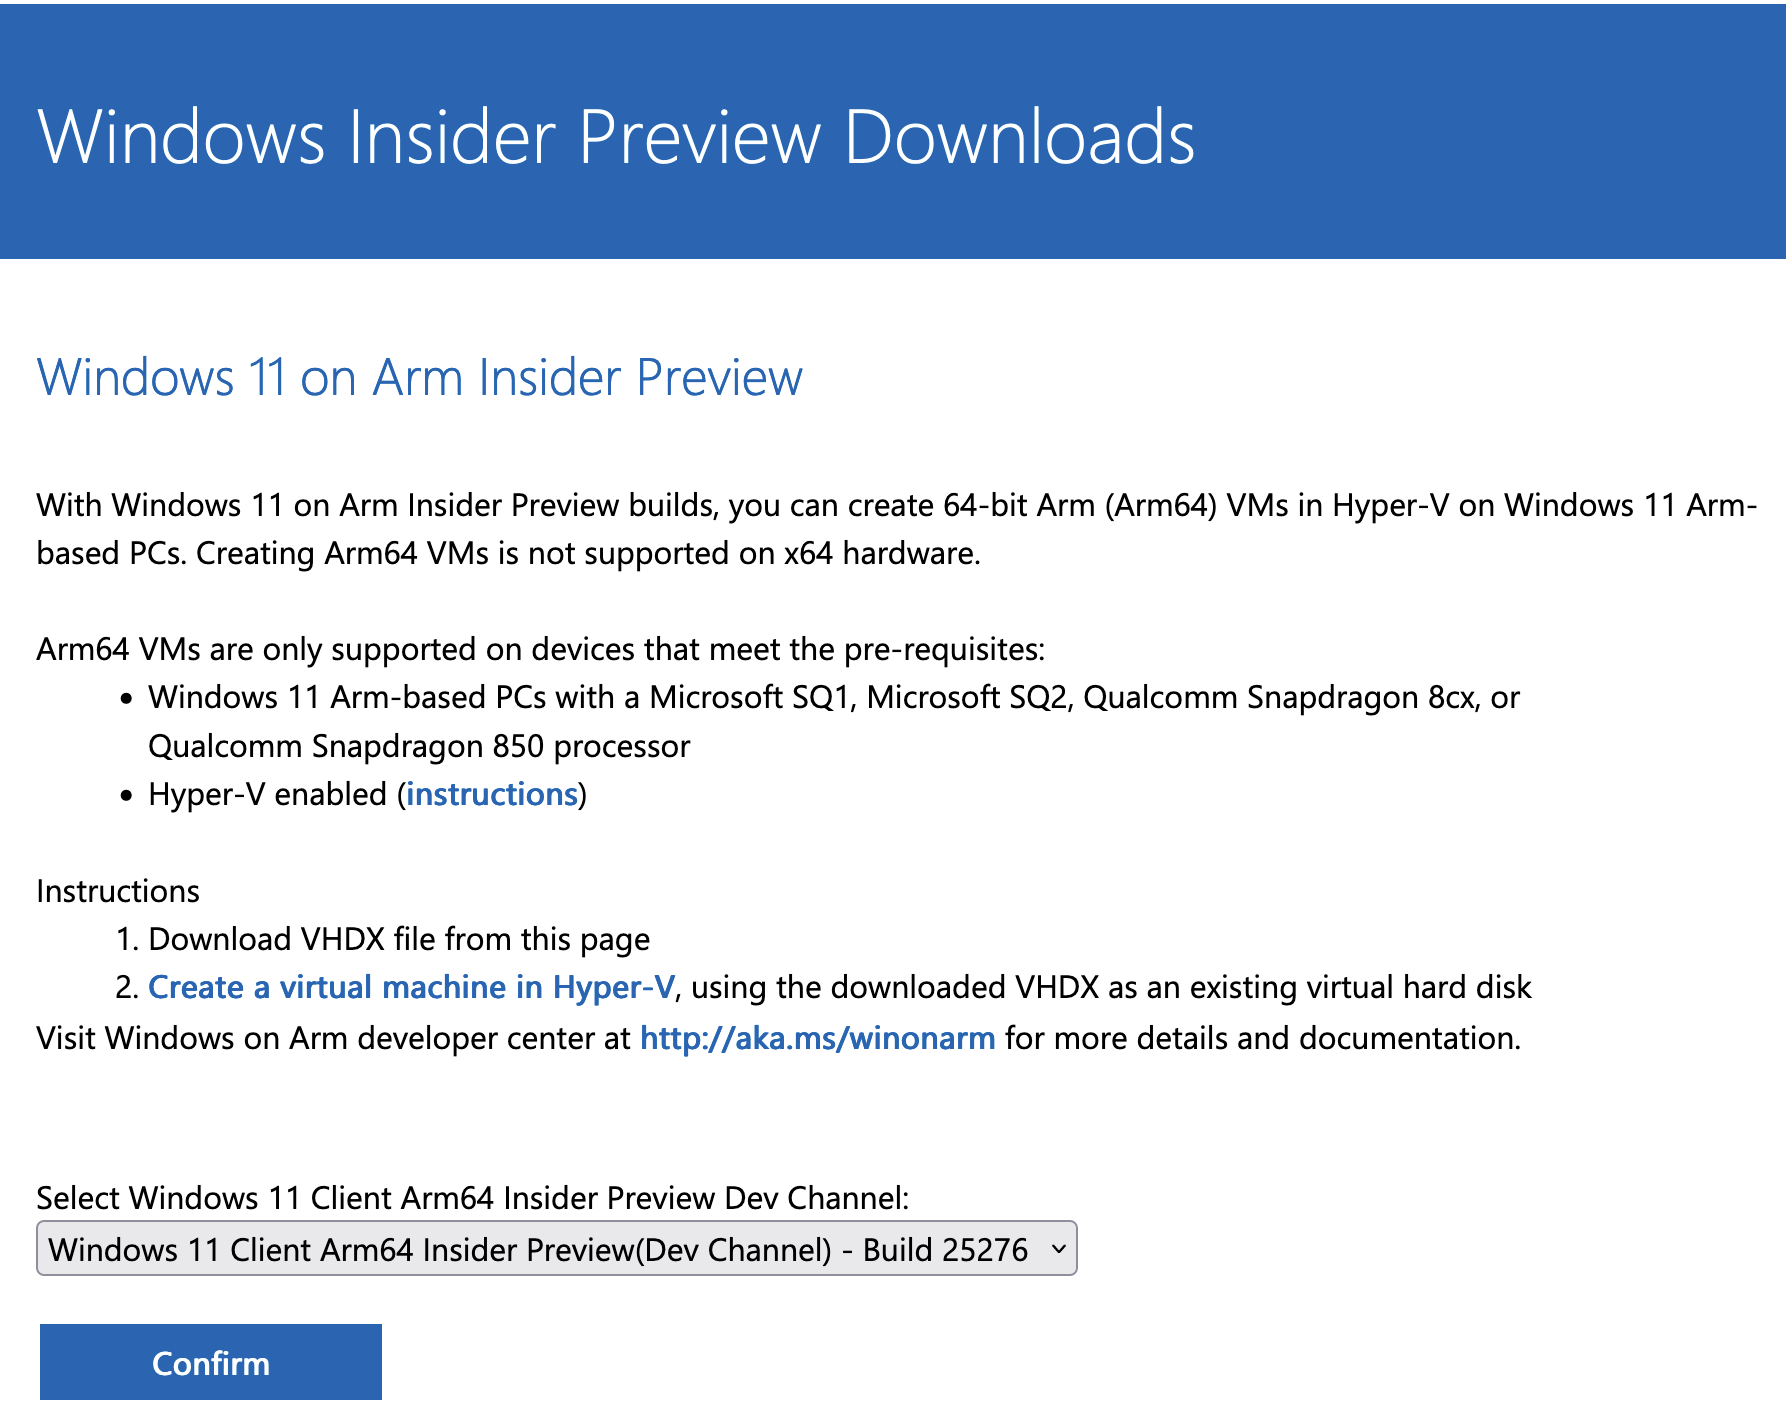 Download selection for Windows 11